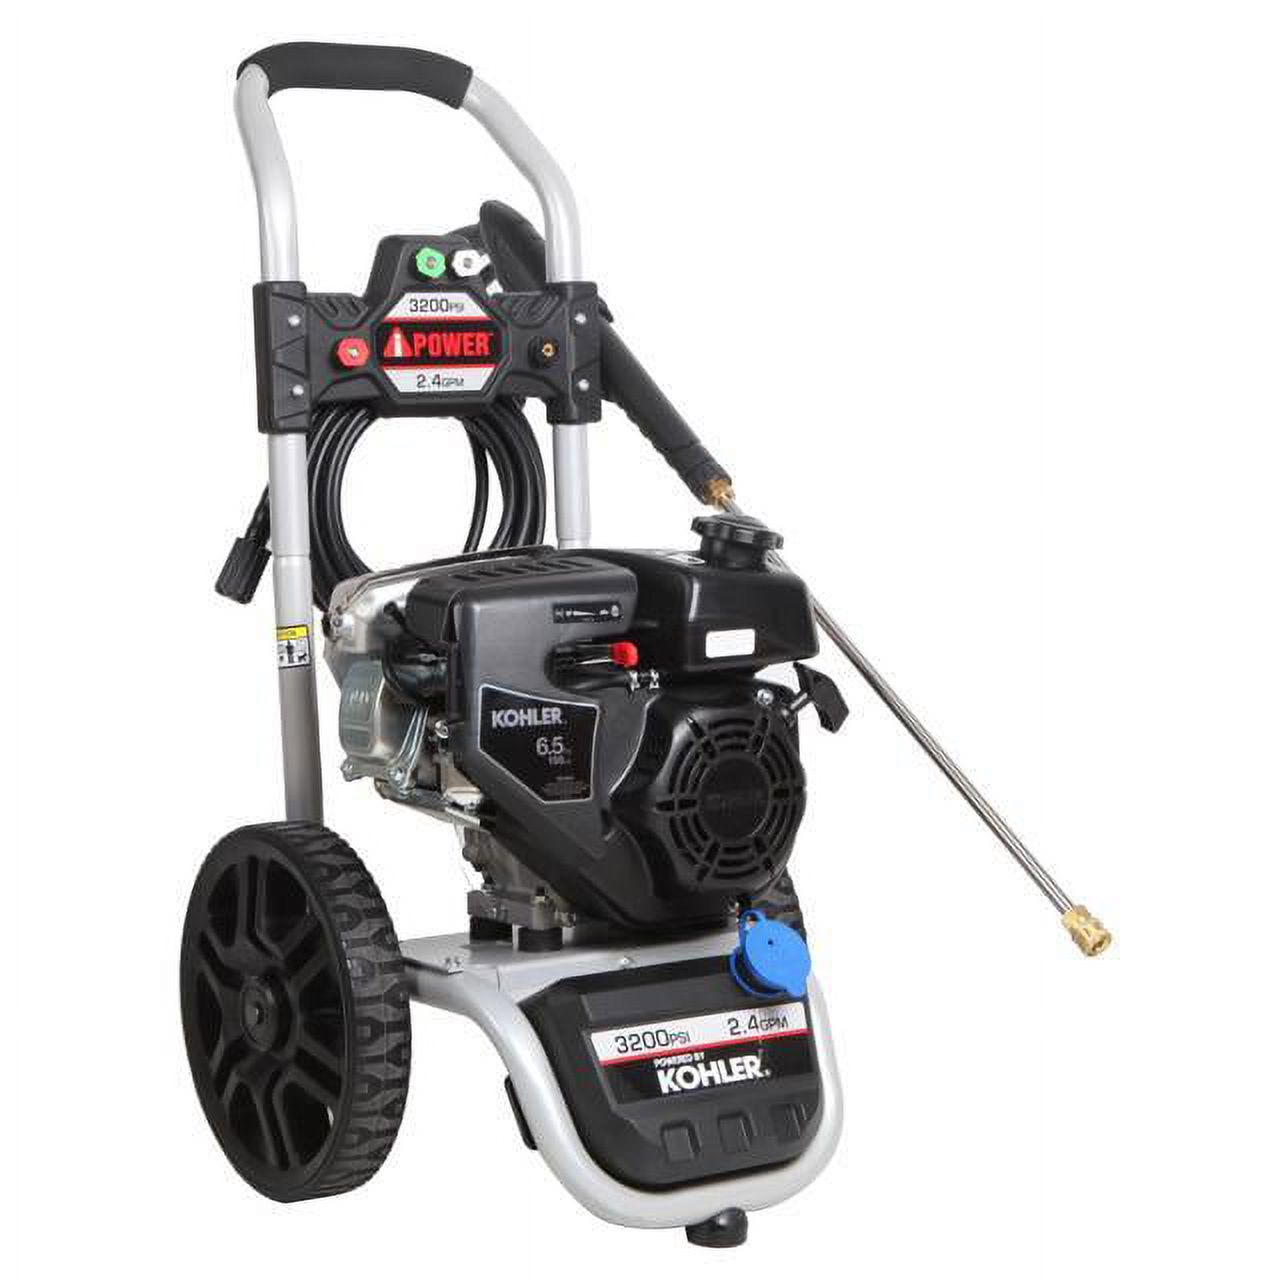 A-IPOWER Power Pressure Washer 3200 PSI Pressure Washer Kohler Engine 2.4 GPM APW3200KH - image 1 of 5